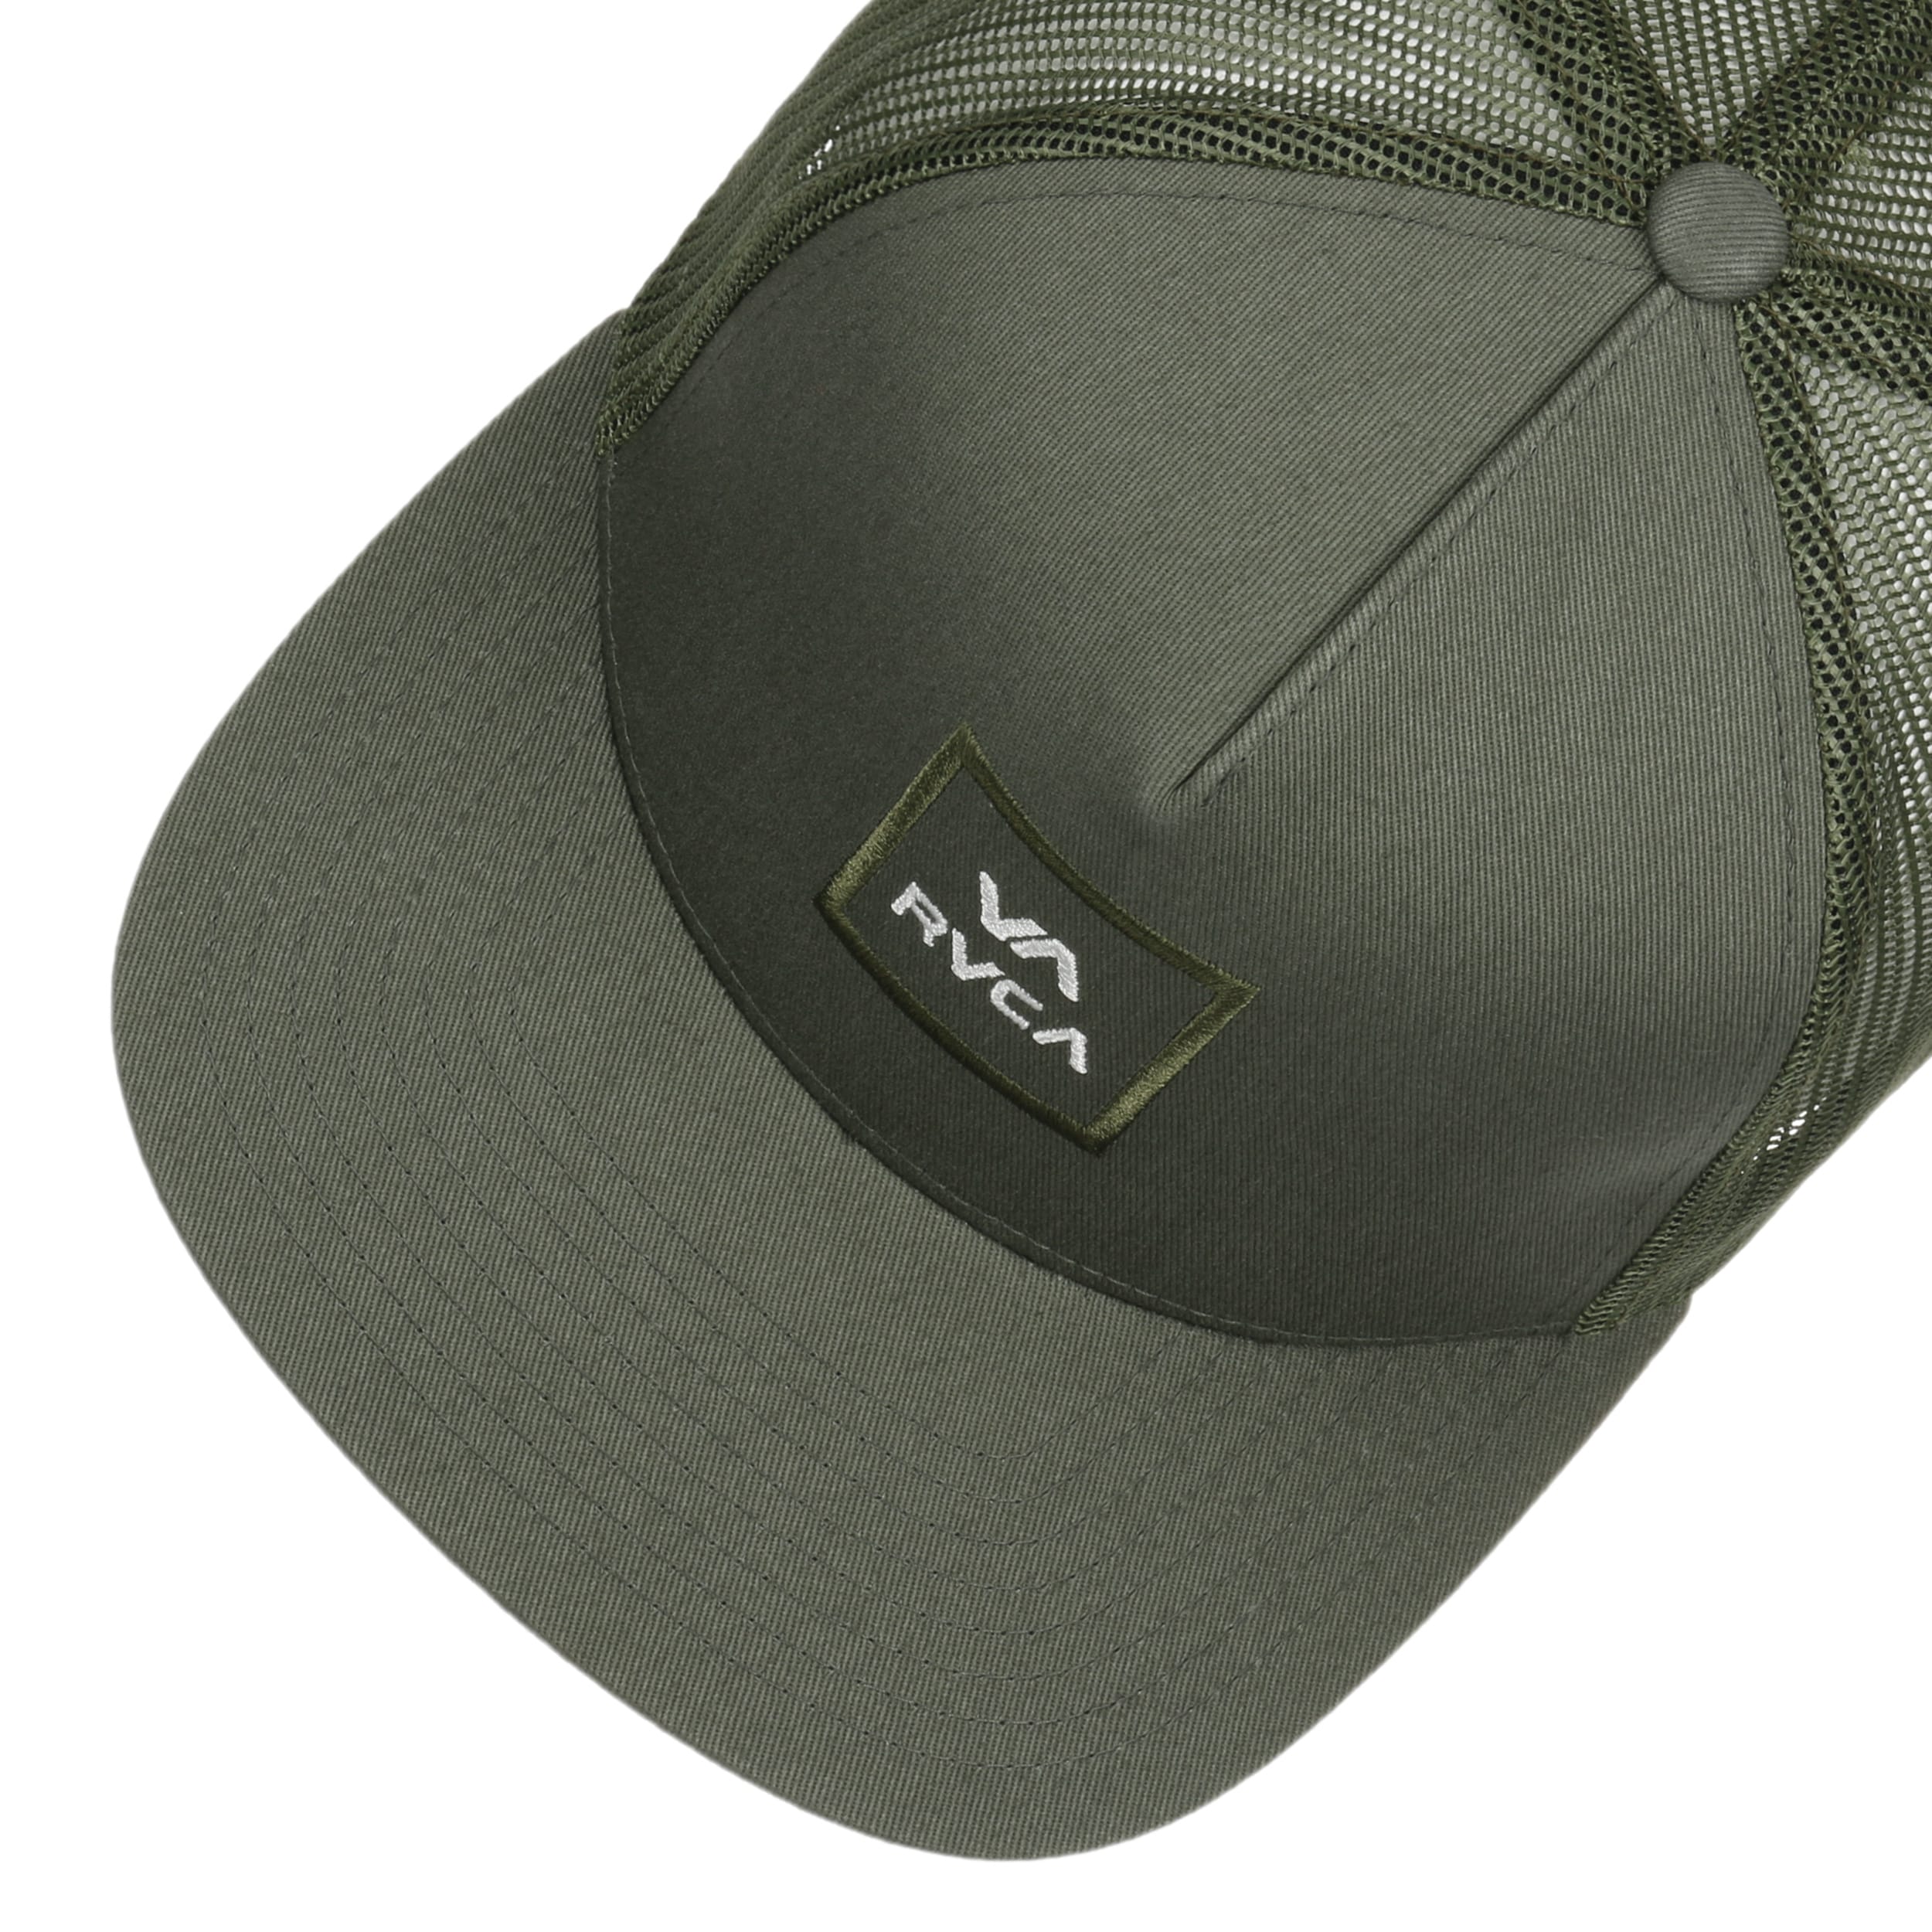 All The Way Trucker Cap by RVCA - 35,95 £